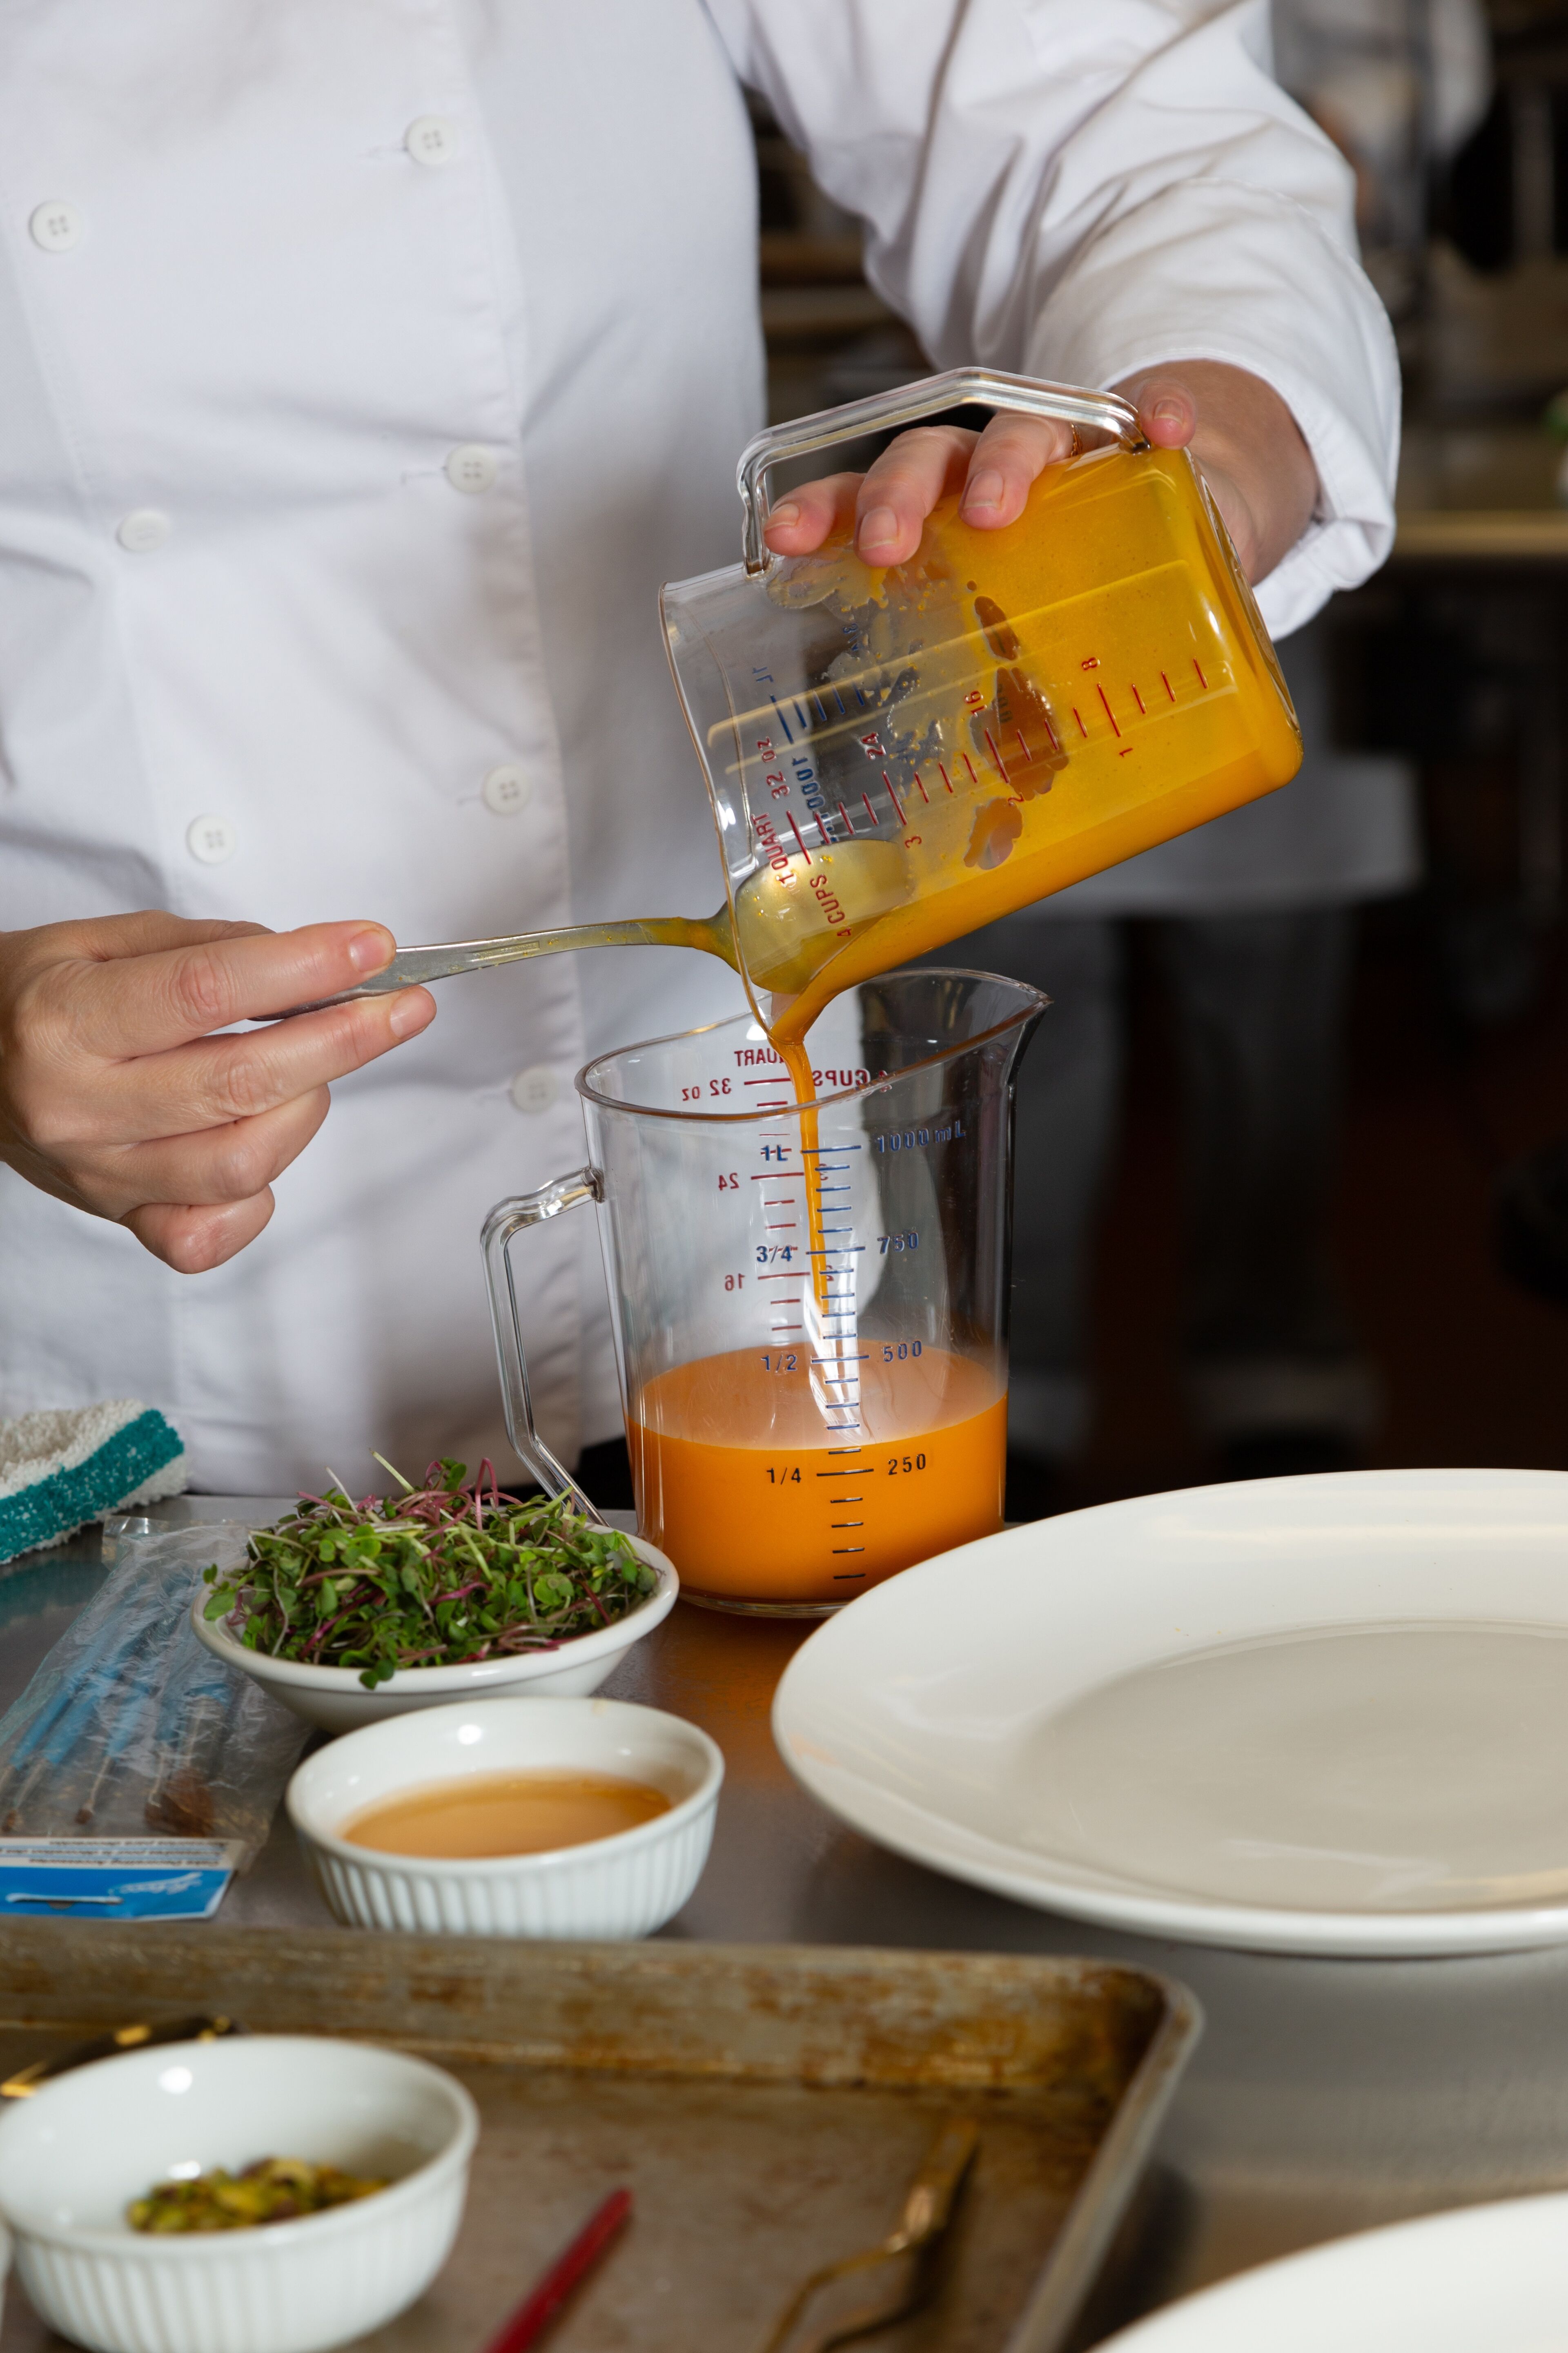 A chef transfers a bright orange sauce from one measuring jug to another, with precision and care.